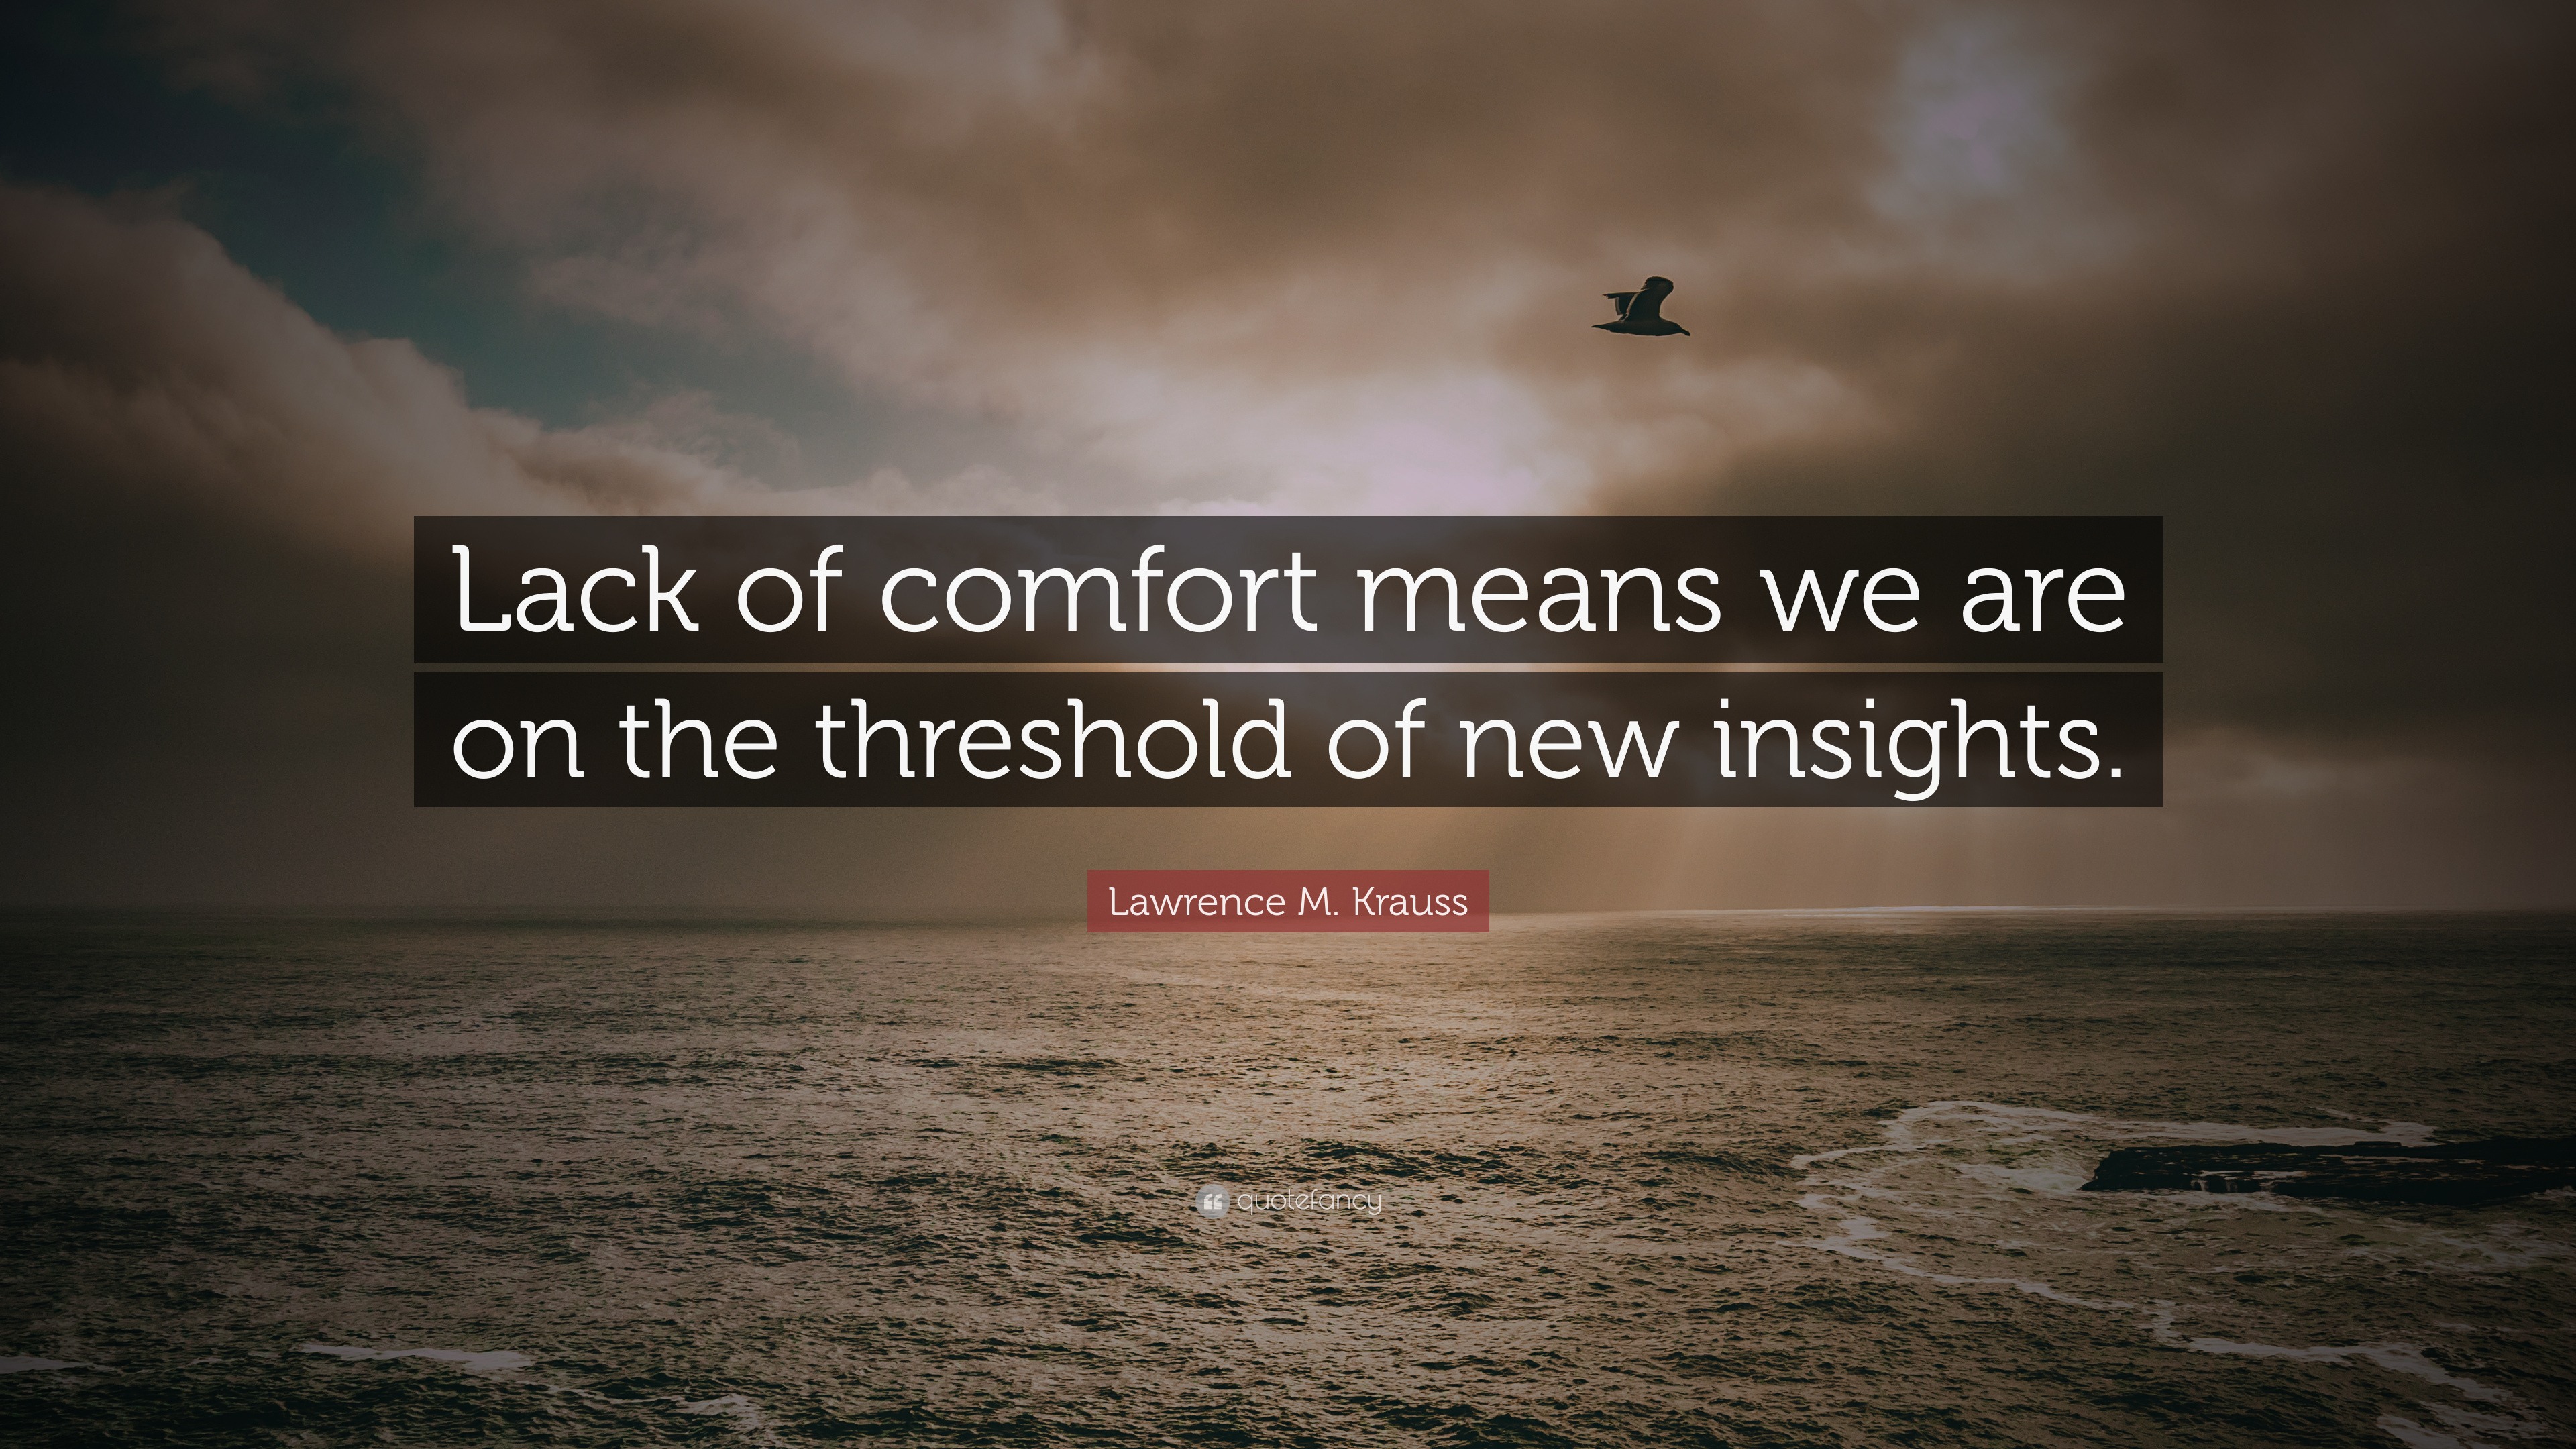 Lawrence M Krauss Quote Lack Of Comfort Means We Are On The Threshold Of New Insights 7 Wallpapers Quotefancy